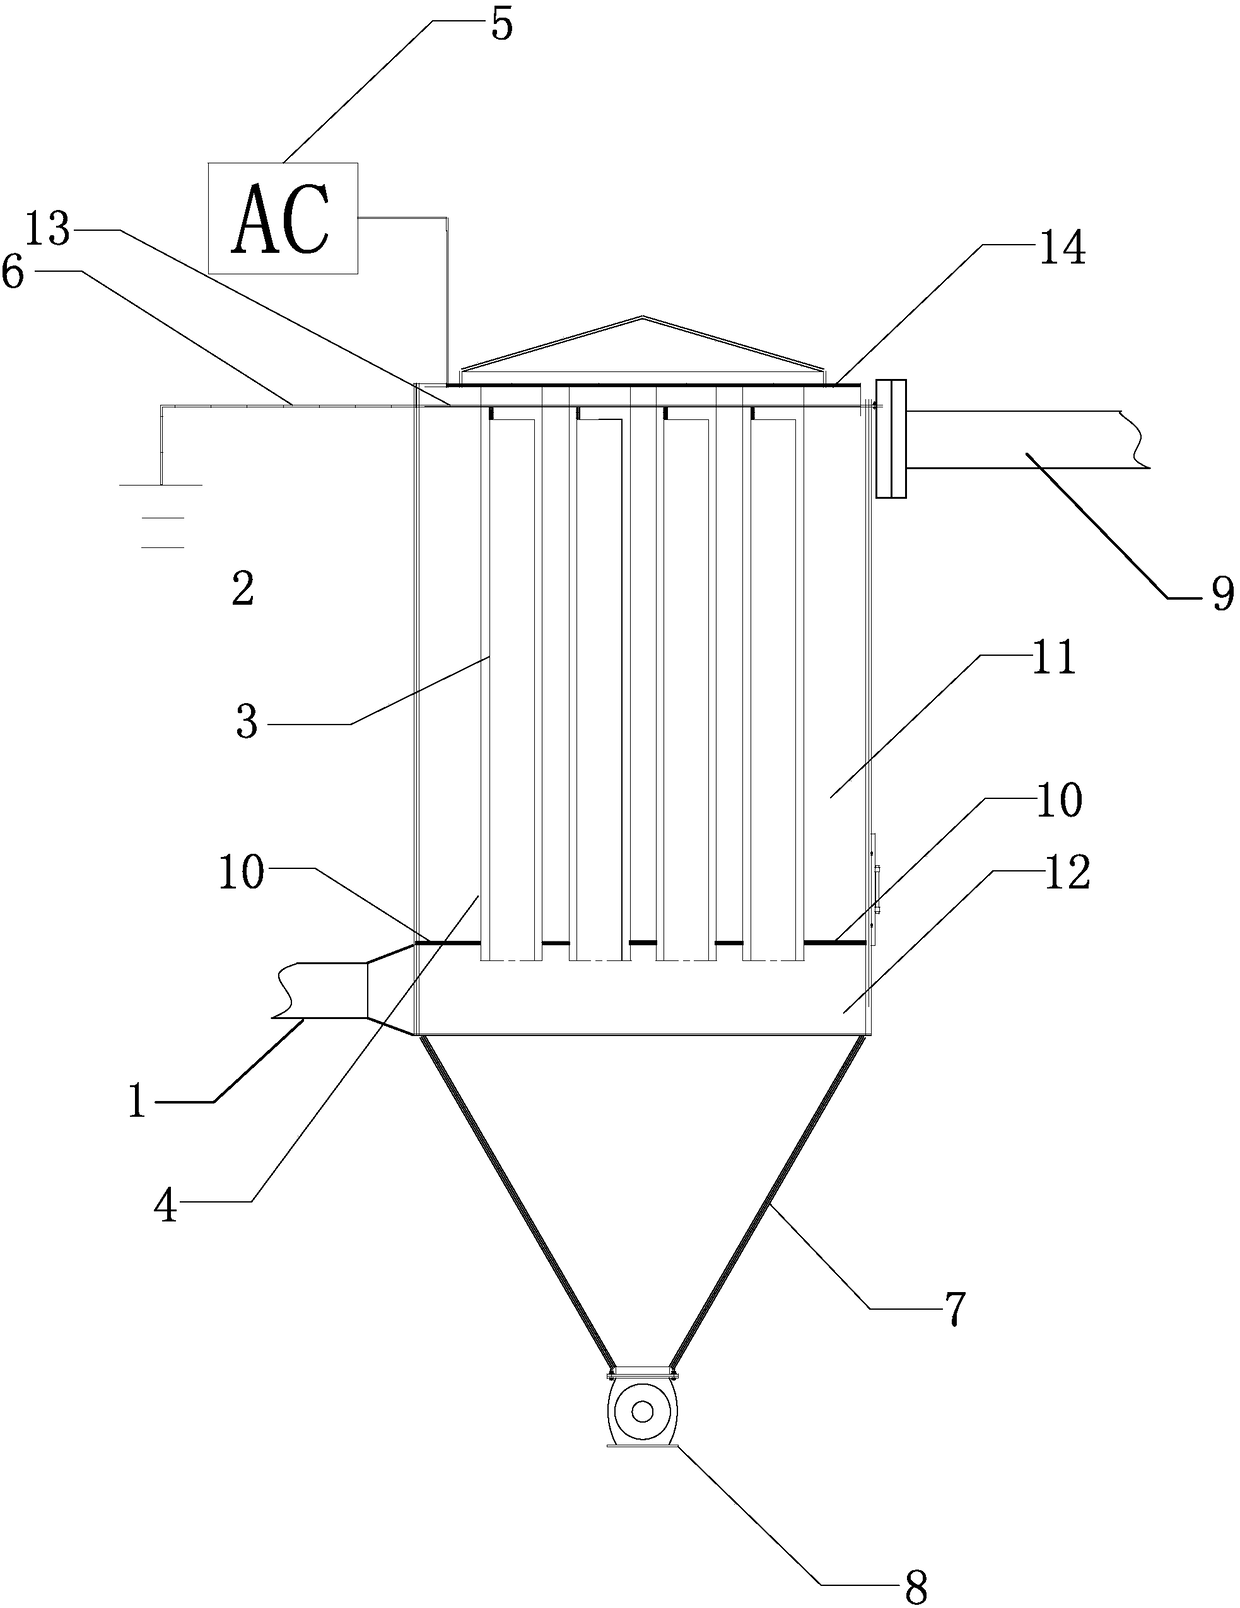 Double-filter-screen electrocoagulation purification apparatus for fine particles